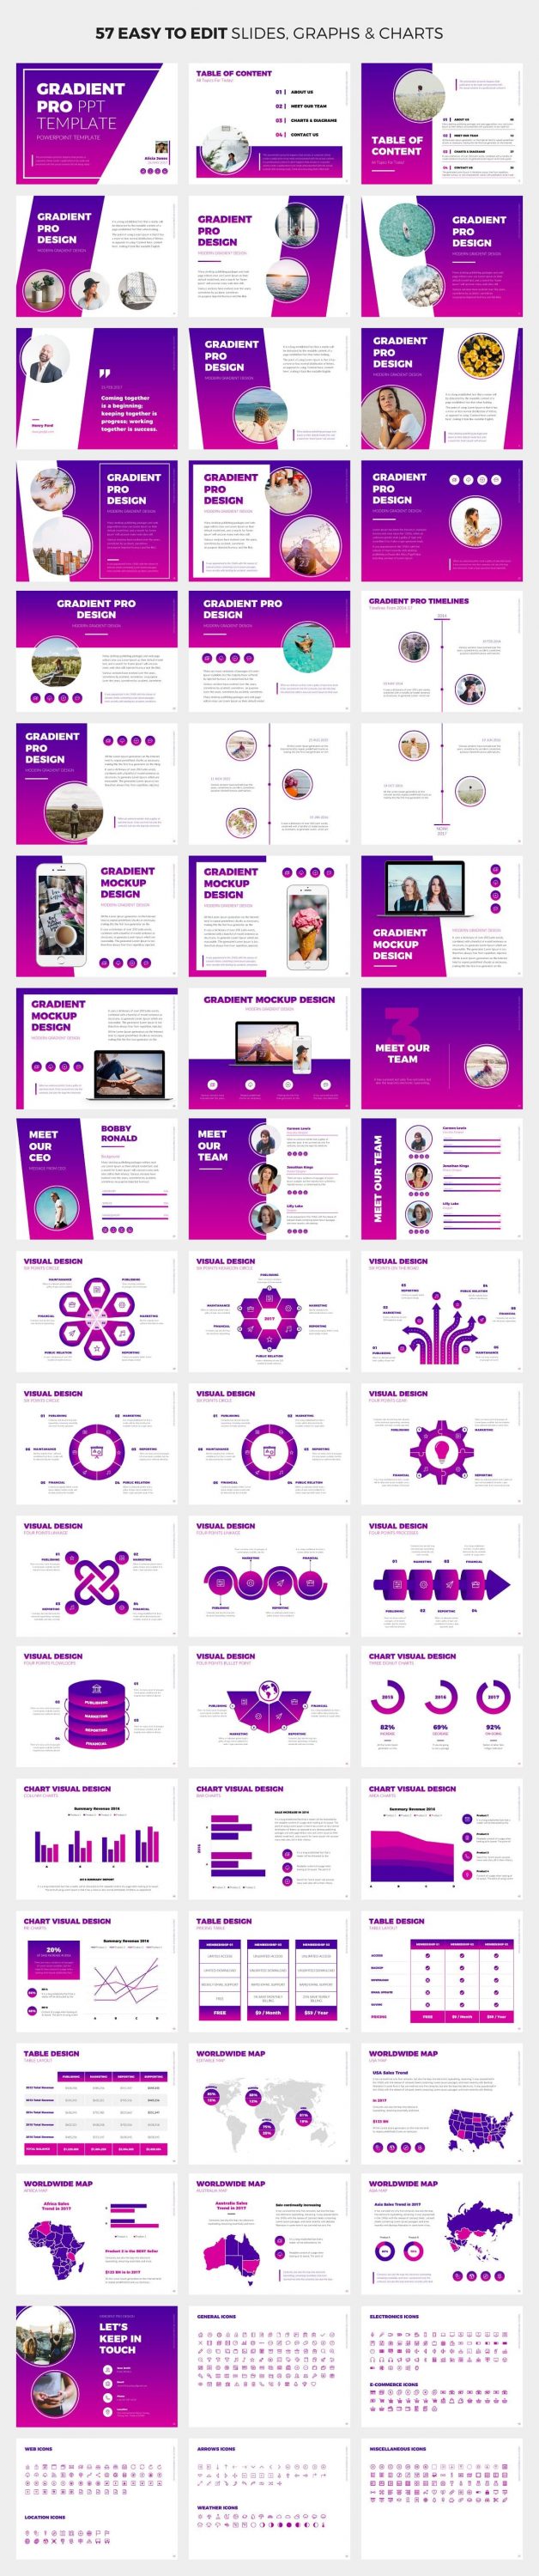 57 easy to edit slides Gradient Pro PowerPoint Template.